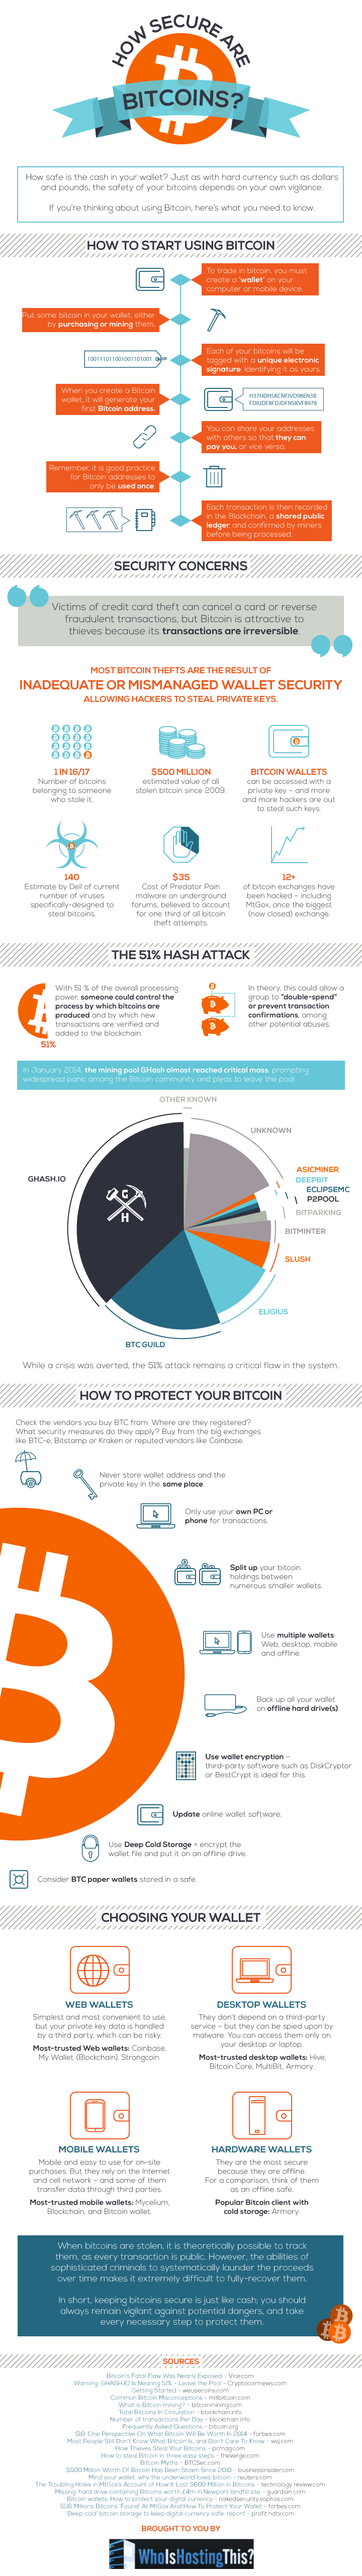 How Secure are Bitcoins?